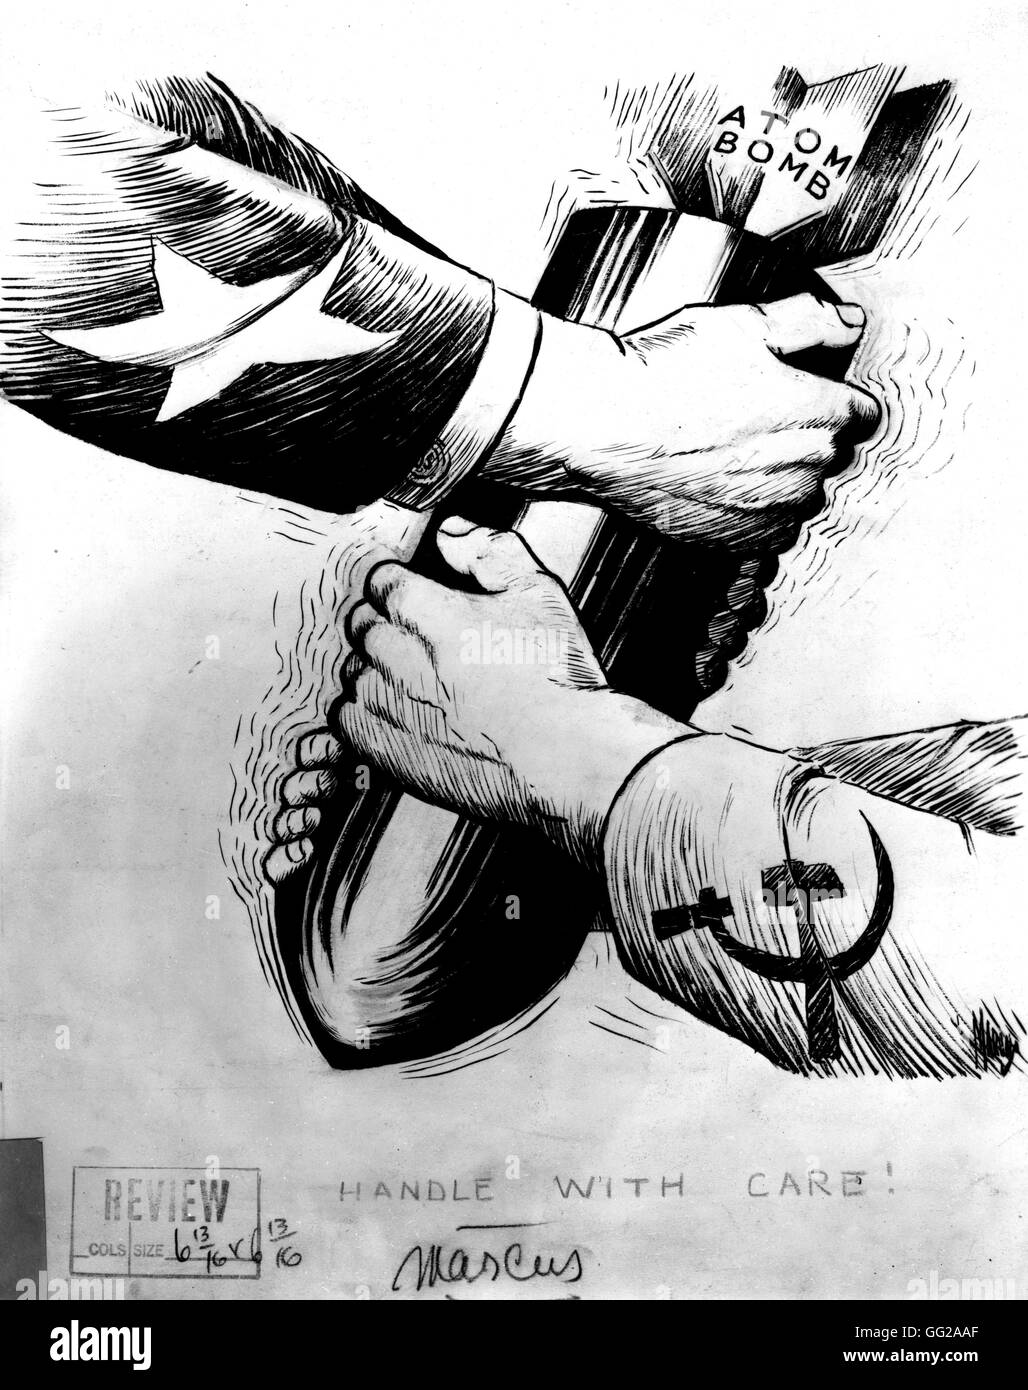 Caricature about the United States and the USSR fighting over the atomic bomb 20th century USA Washington. Library of Congress Stock Photo